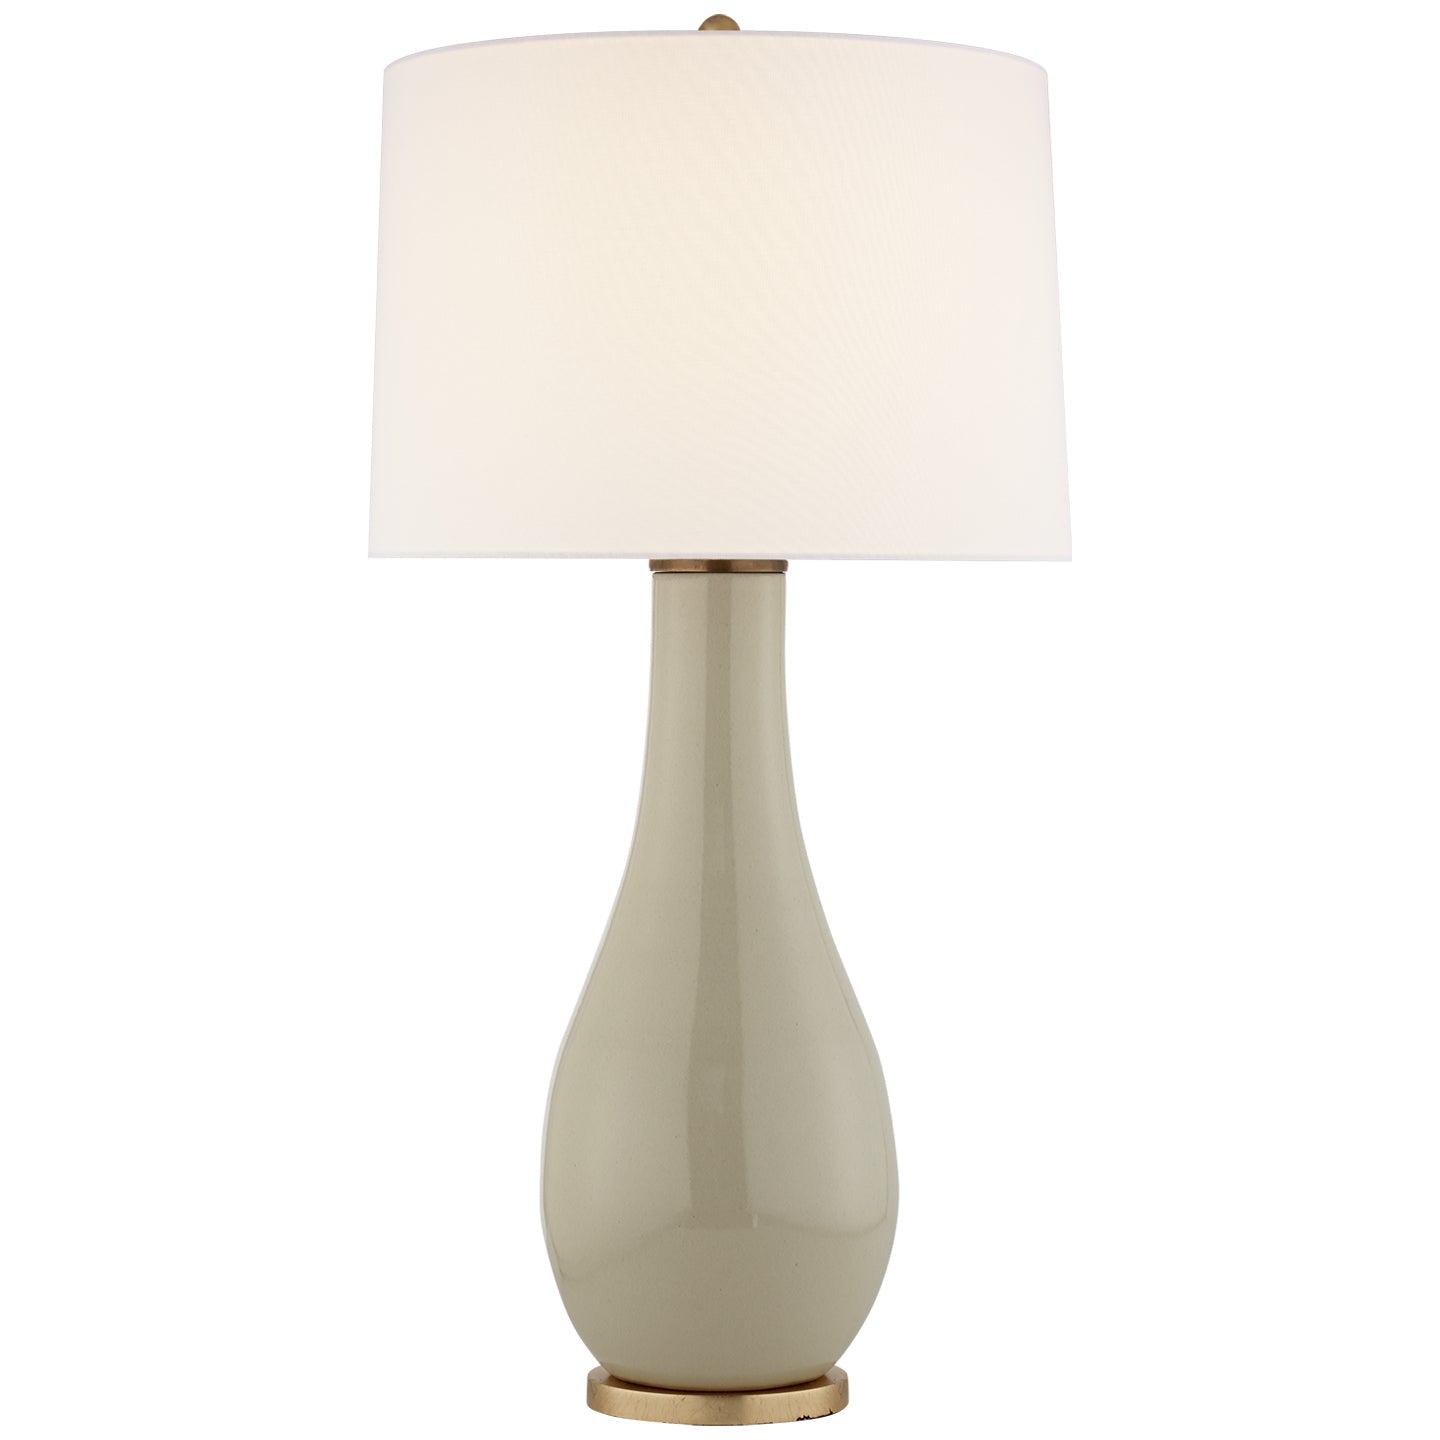 Load image into Gallery viewer, Visual Comfort Signature - CHA 8655ICO-L - One Light Table Lamp - Orson - Coconut Porcelain
